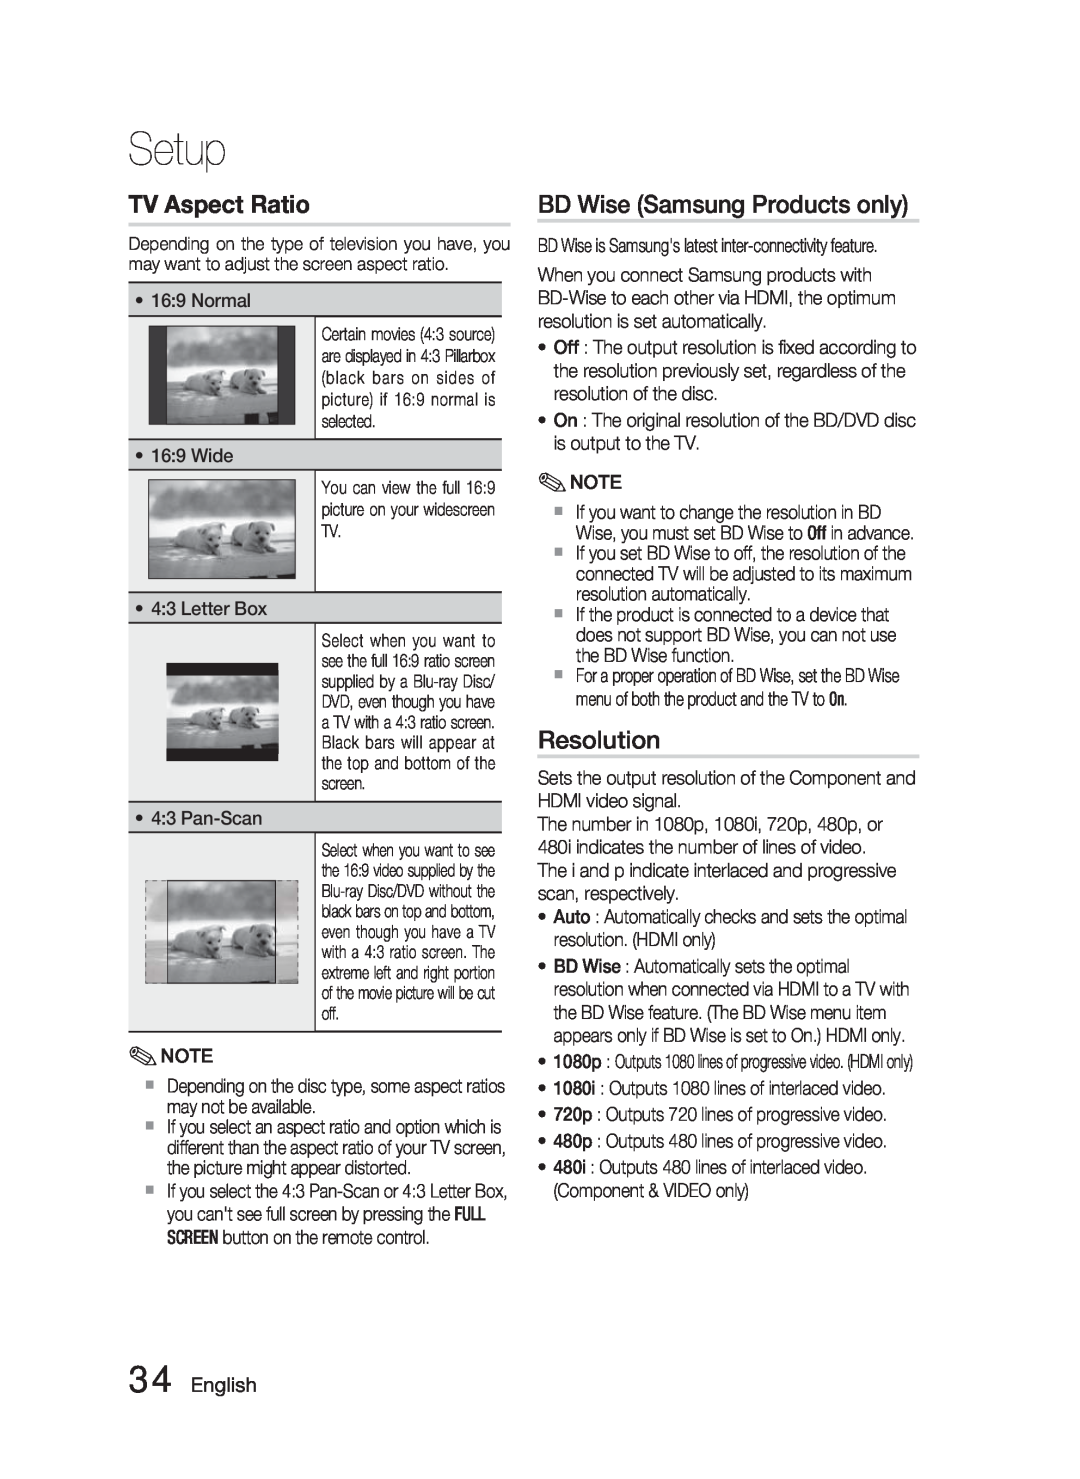 Samsung AH68-02279Y user manual TV Aspect Ratio, BD Wise Samsung Products only, Resolution, English, Setup 